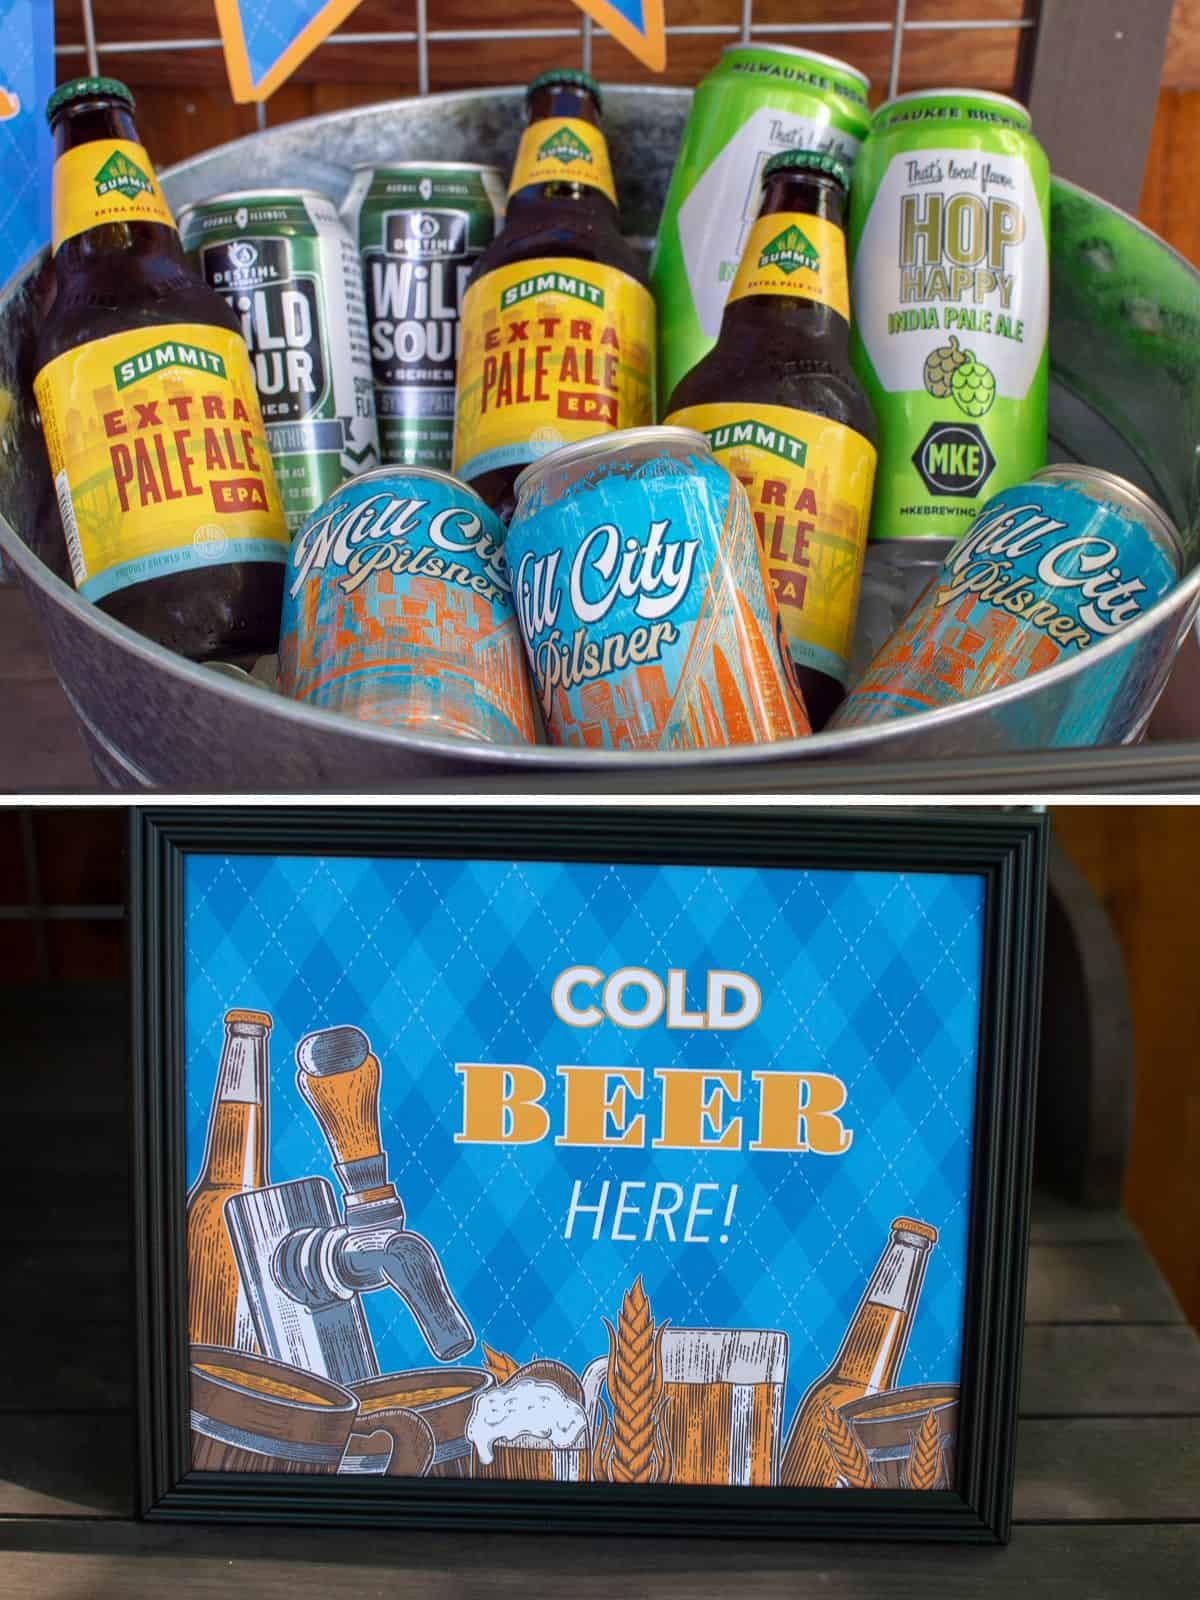 bucket of beer with "Cold Beer Here" sign